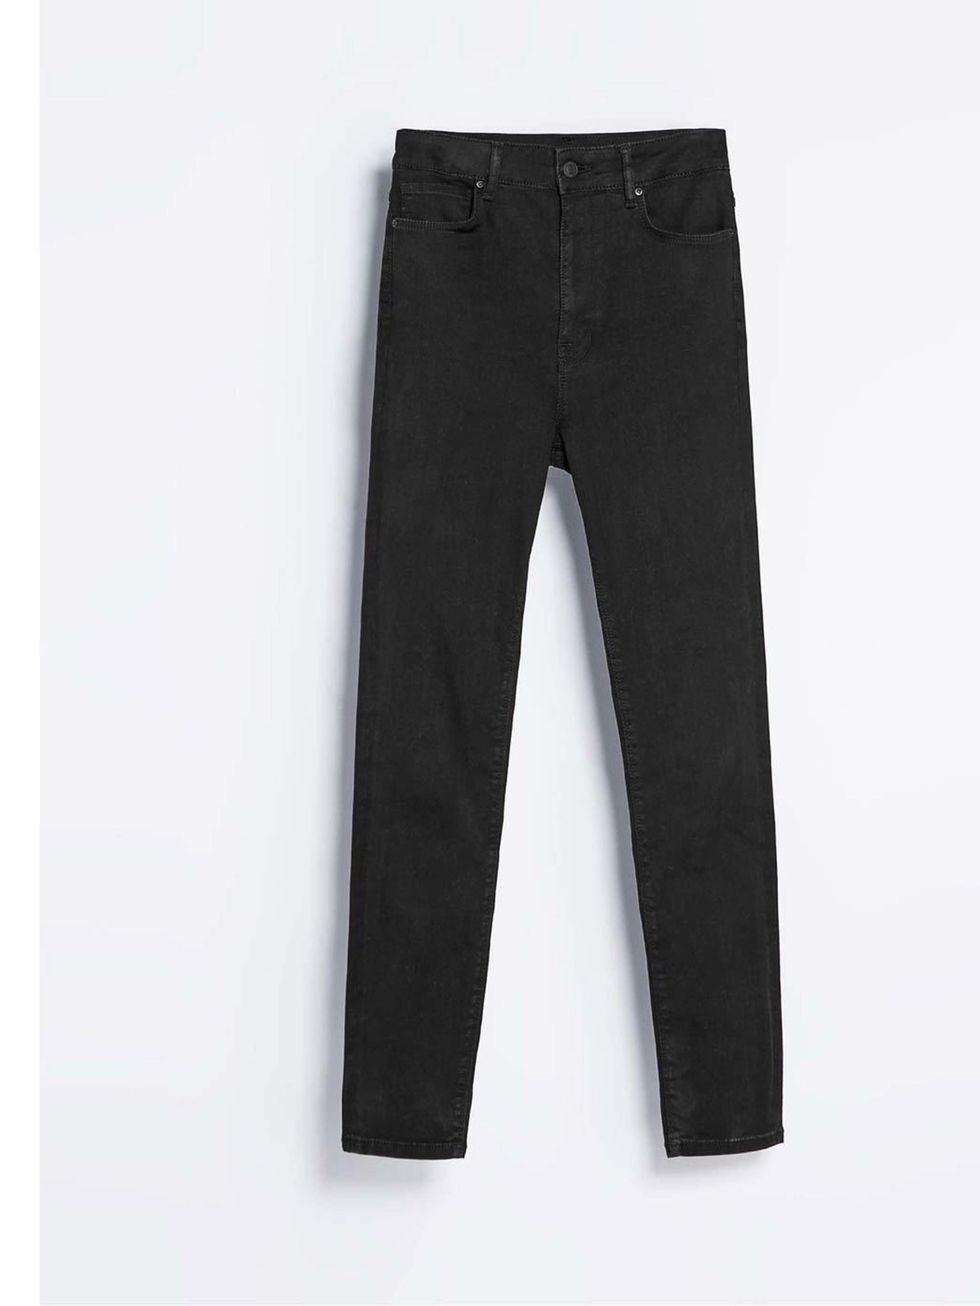 <p>A pair of black skinny jeans: wardrobe staple! </p><p><a href="http://www.zara.com/uk/en/new-collection/woman/trousers/slim-fit-jeans-c358005p1668269.html">Zara</a>, £35.99</p>